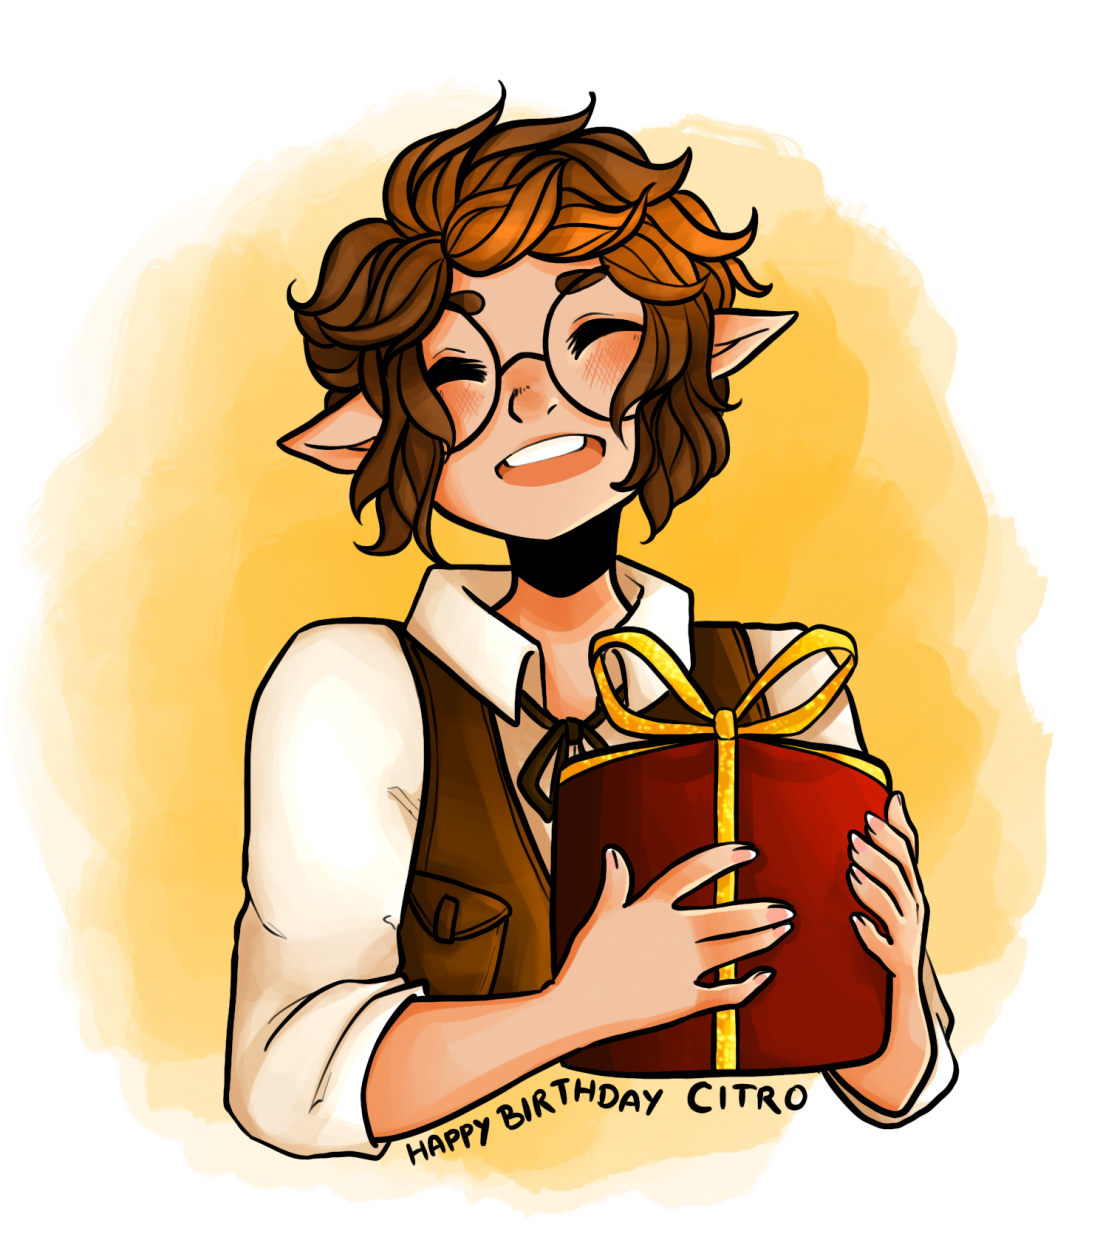 A short, brown haired elf with olive skin and big glasses. She wears a dress shirt and a vest with multiple pockets.